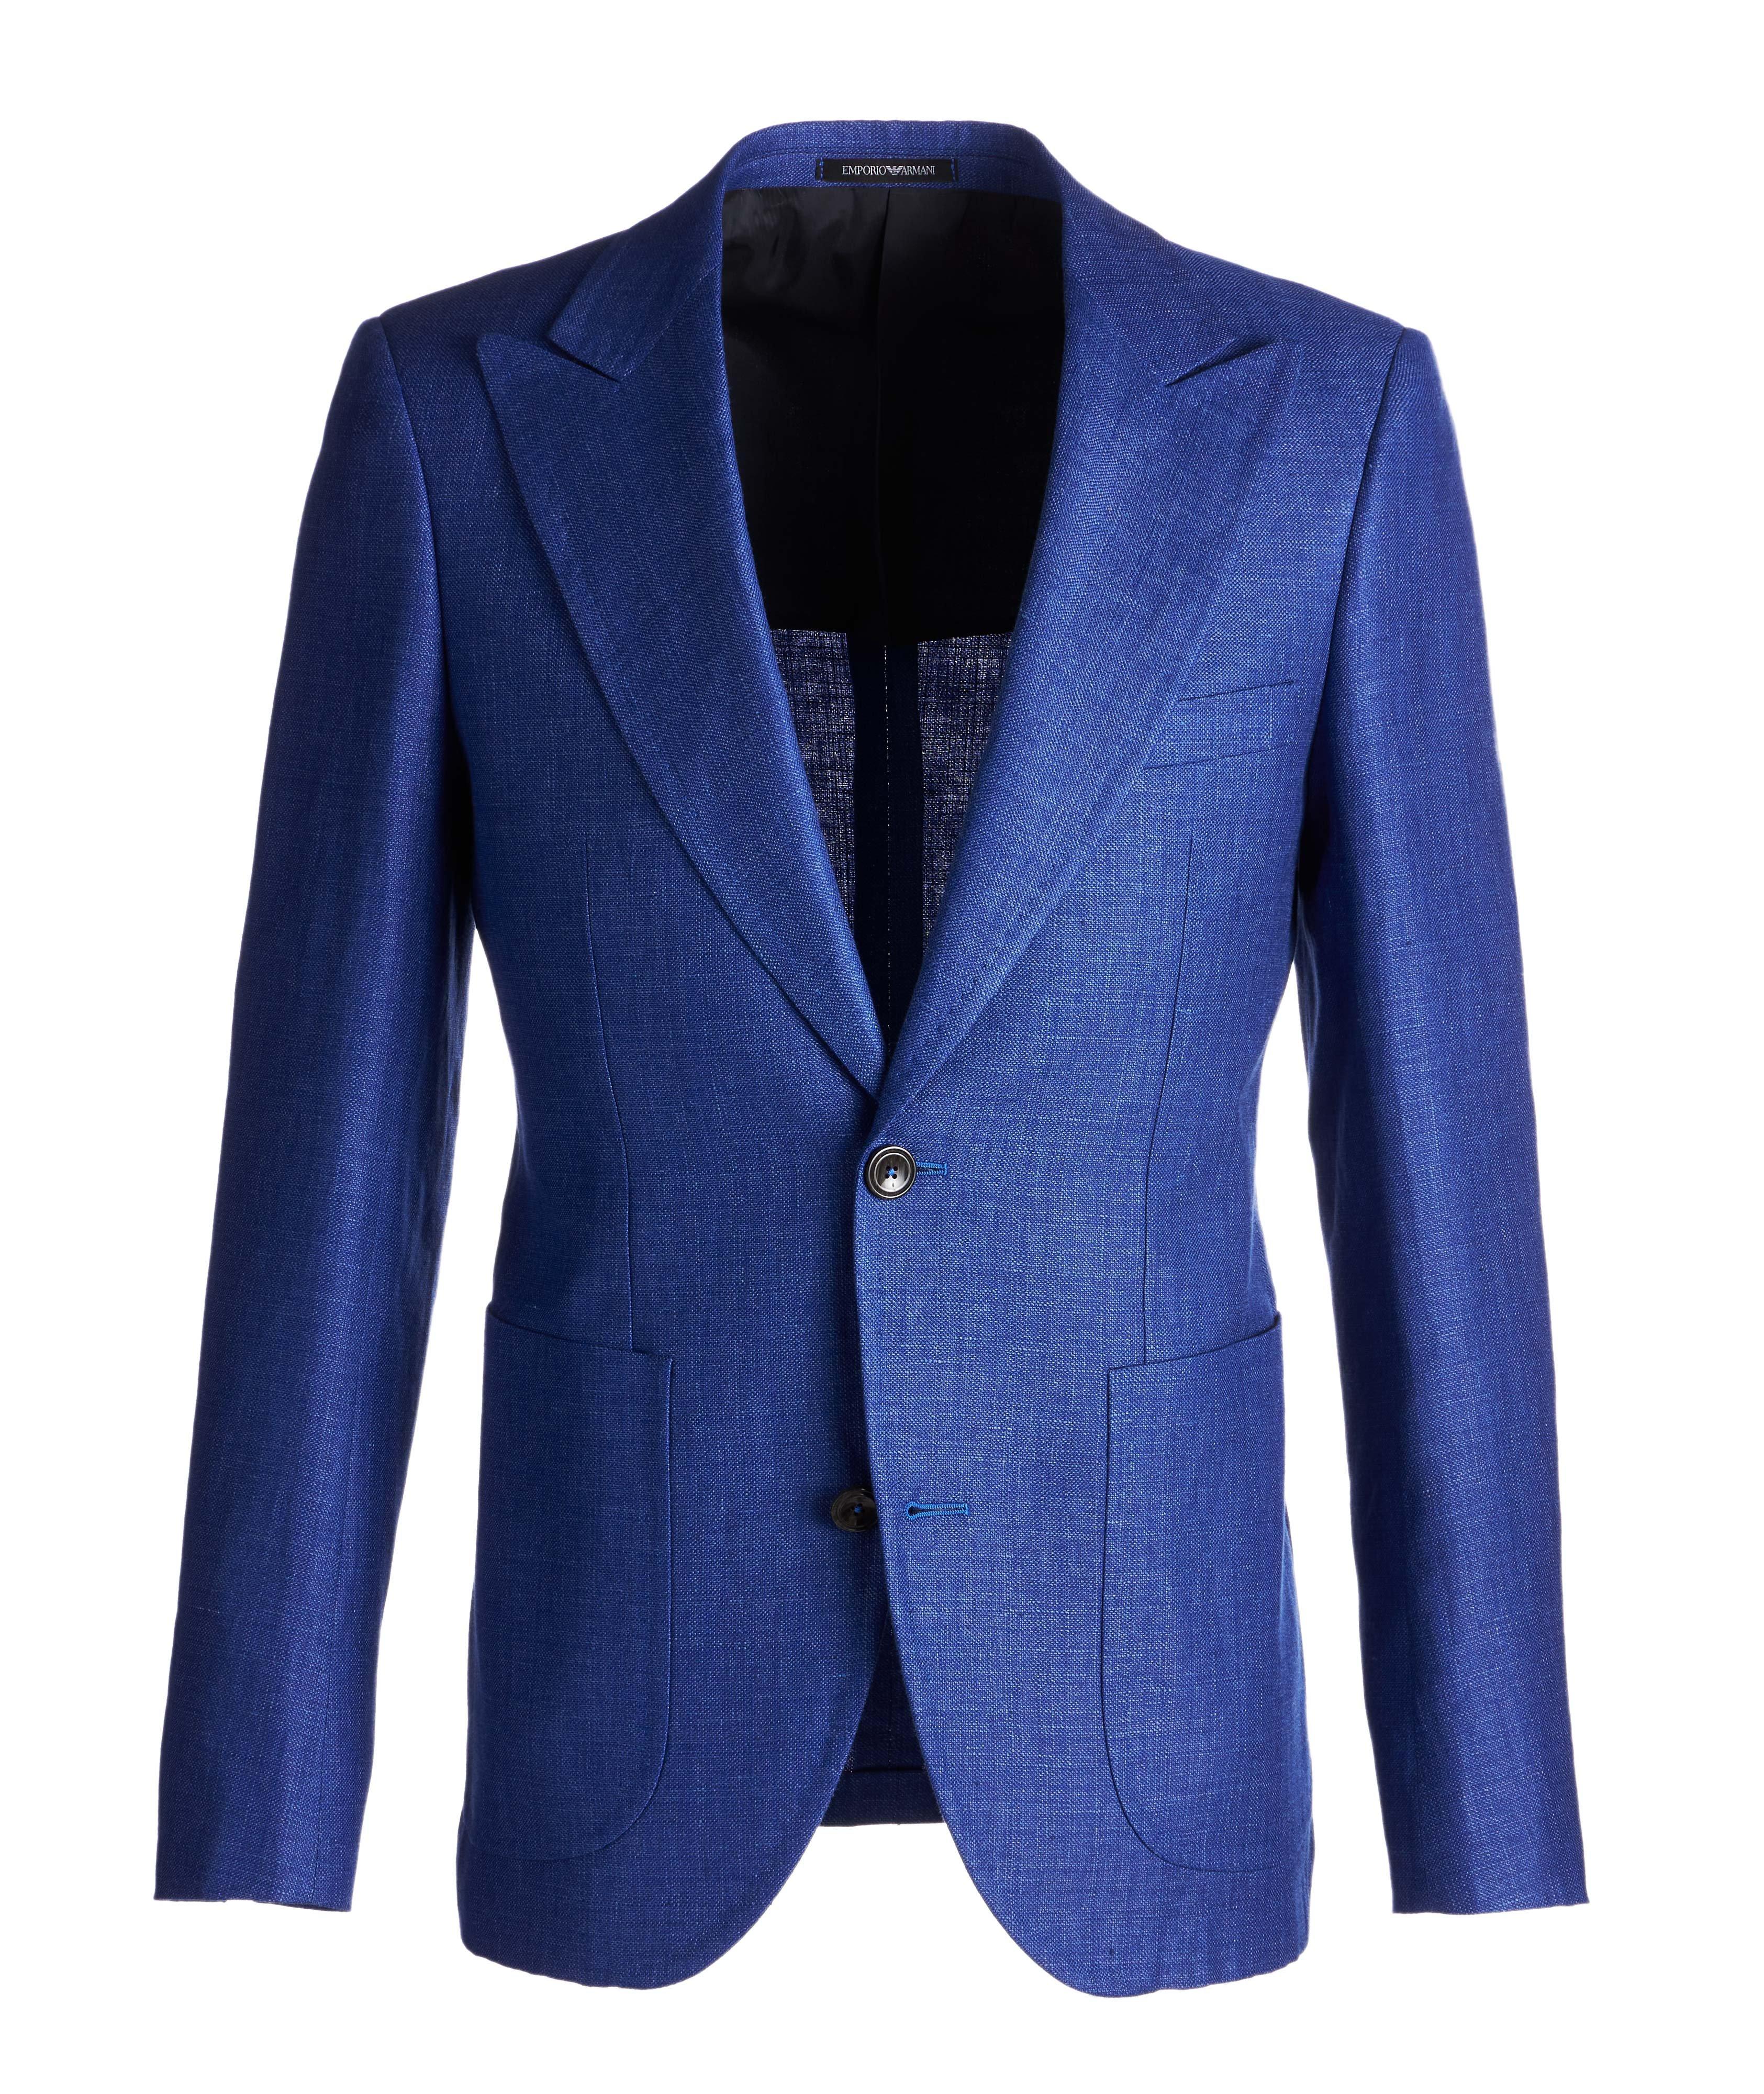 Savile Line Contemporary Fit Linen-Wool Sports Jacket  image 0